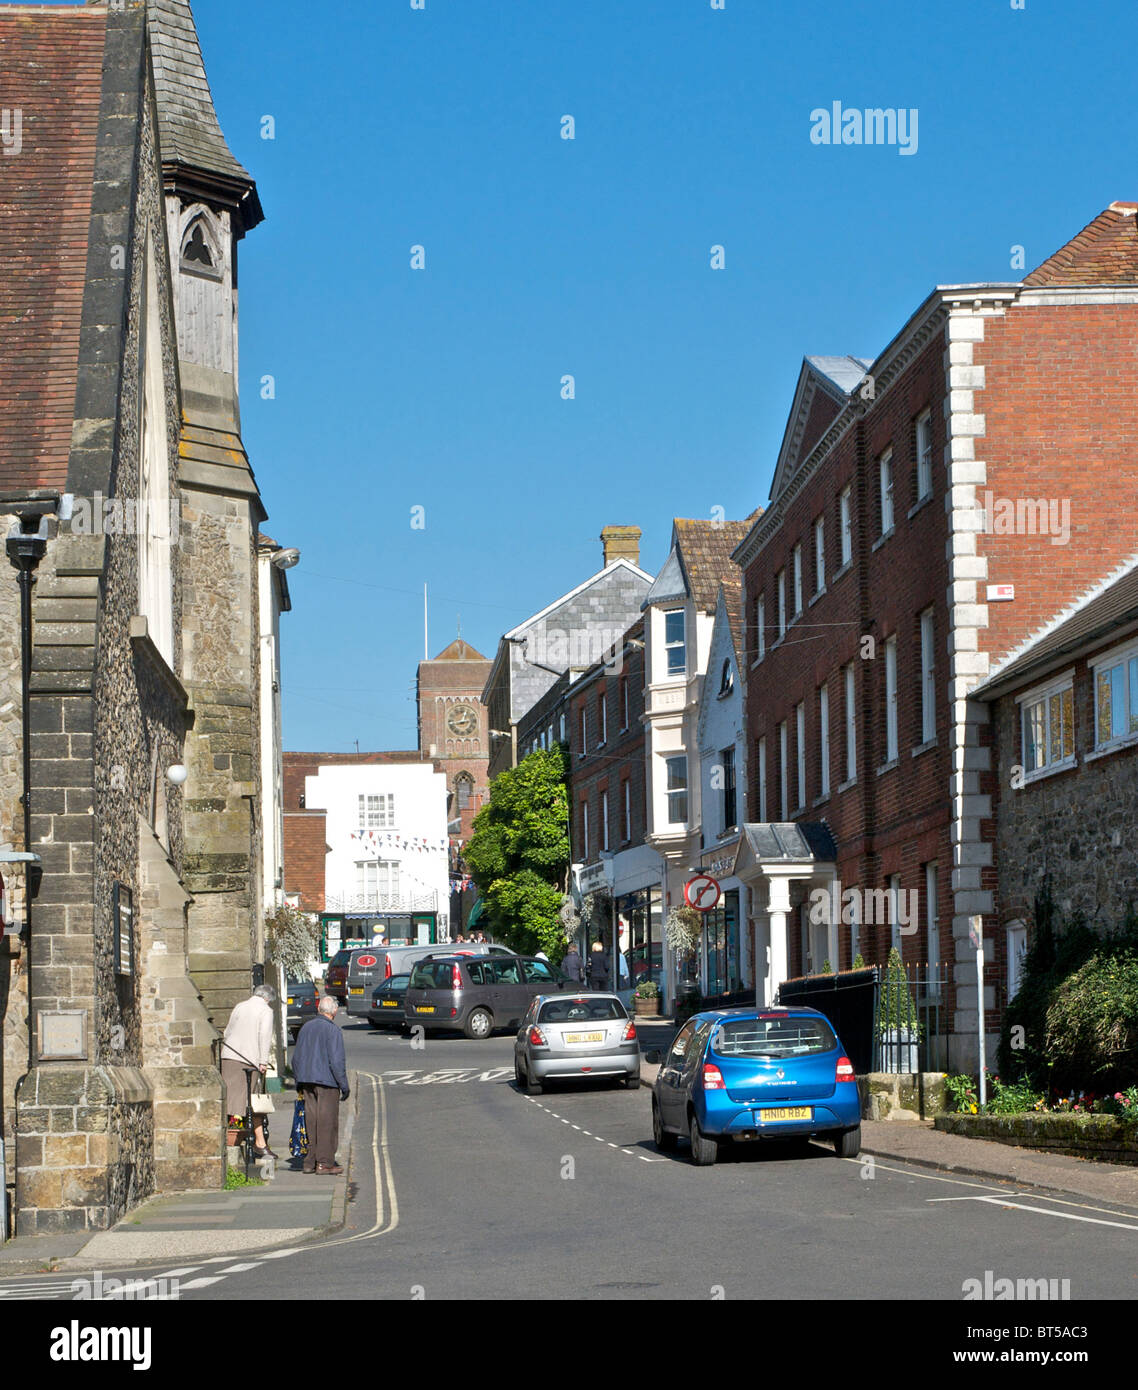 An image of the old market town of Petworth in West Sussex. UK. This is a view looking north from Golden Square. Stock Photo